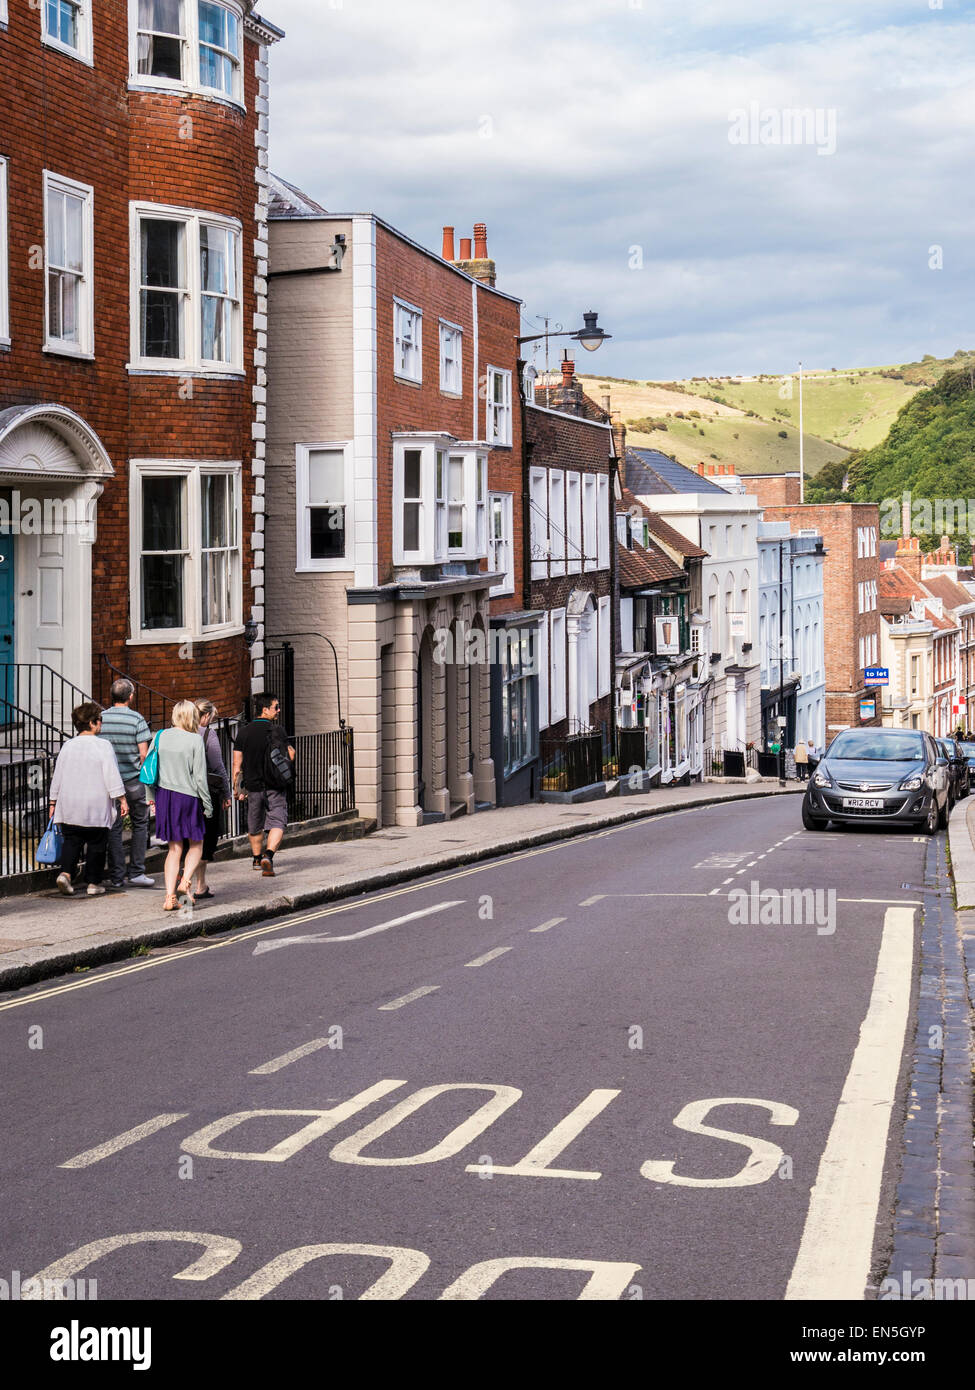 Part of the High Street  in Lewes leading towards the River Ouse & Cliffe High Street, Lewes, East Sussex. Stock Photo